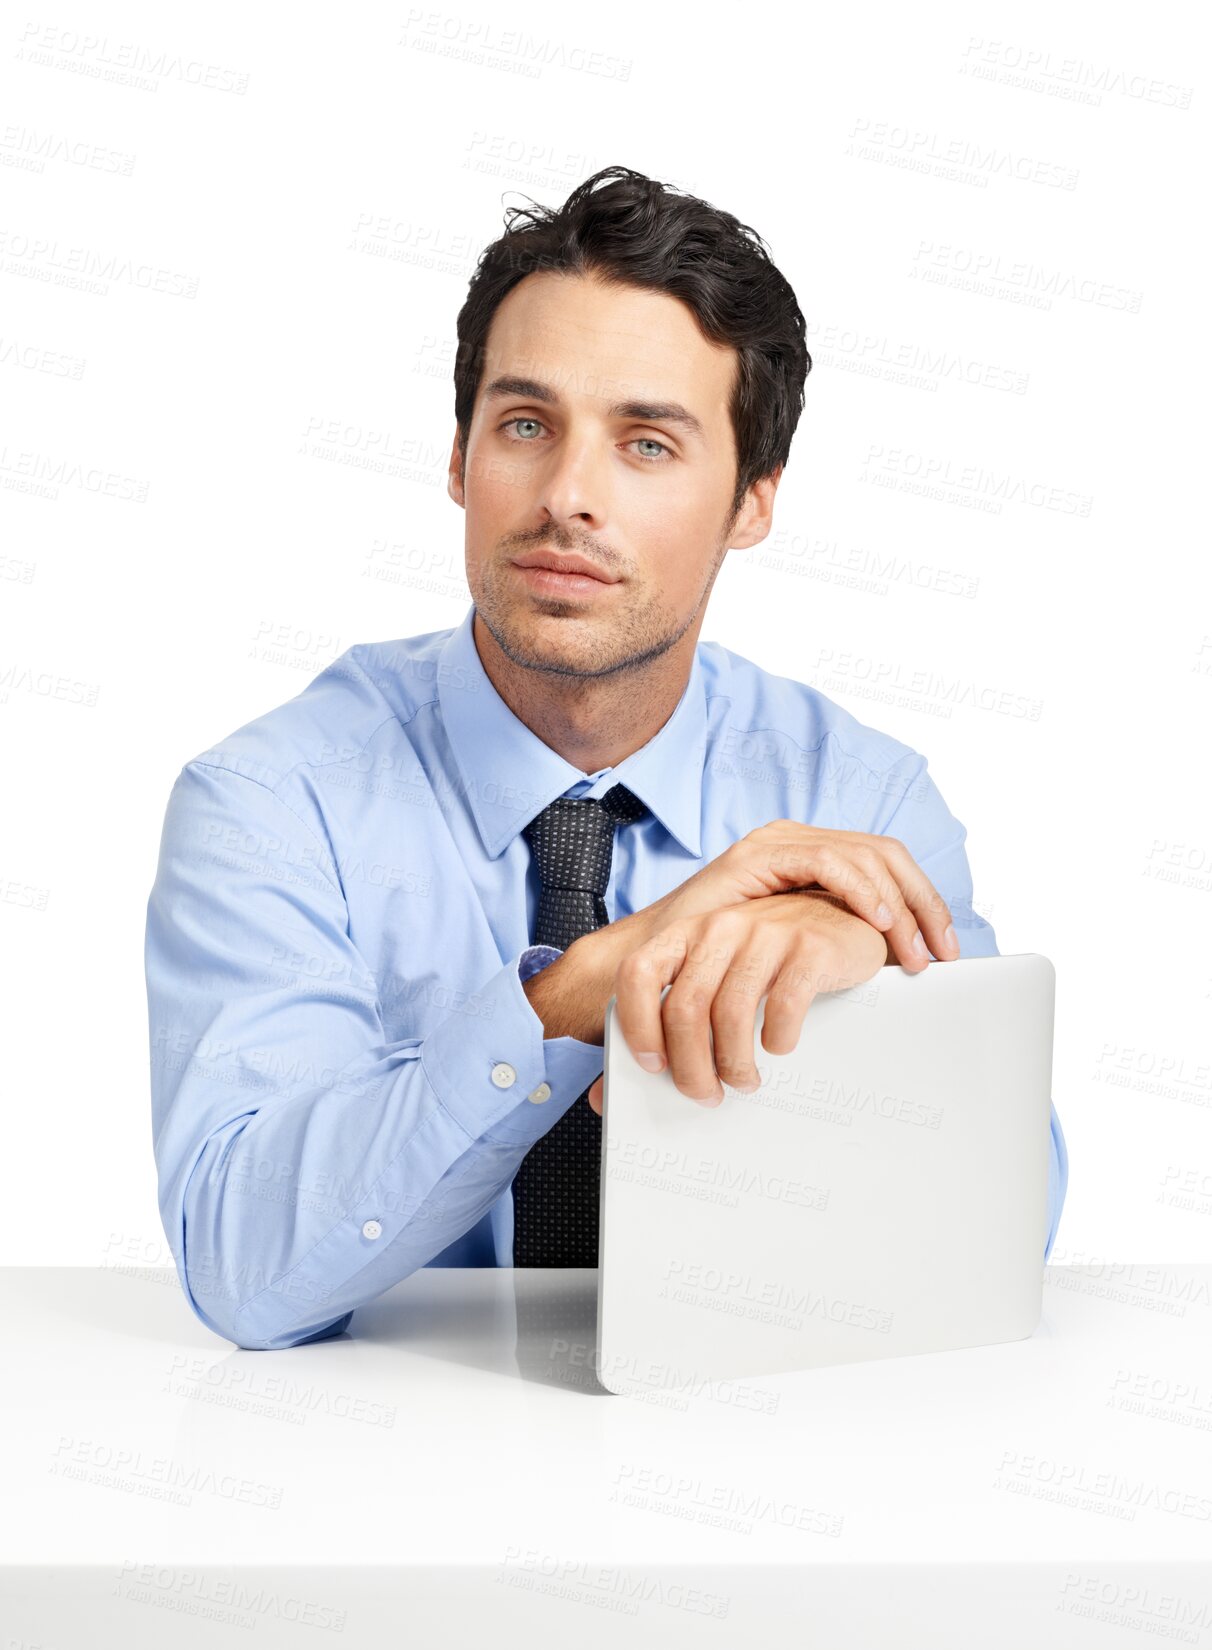 Buy stock photo Technology, portrait of a businessman with a tablet at his desk and isolated against a transparent png background. Online communication or social networking, confident and male accountant with tech 